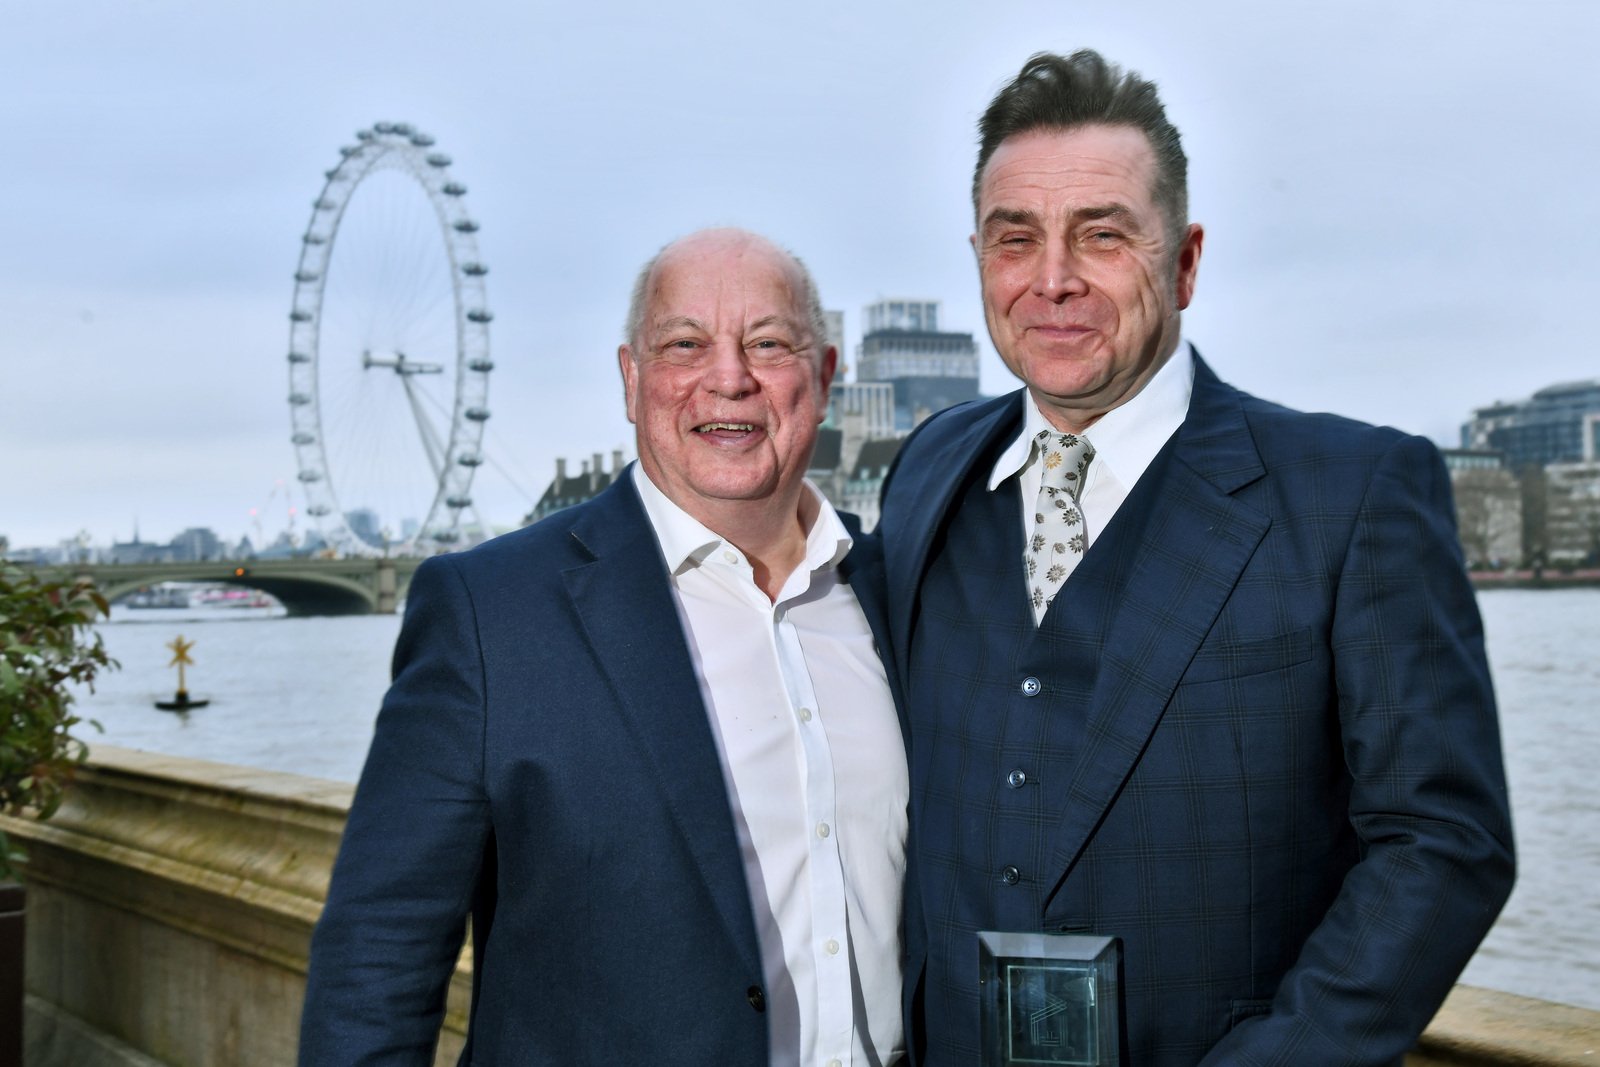 Andrew Smith stands alongside CEO of DRPG, Dale Parmenter in front of the River Thames and the London Eye at EVCOM Fellowship Awards